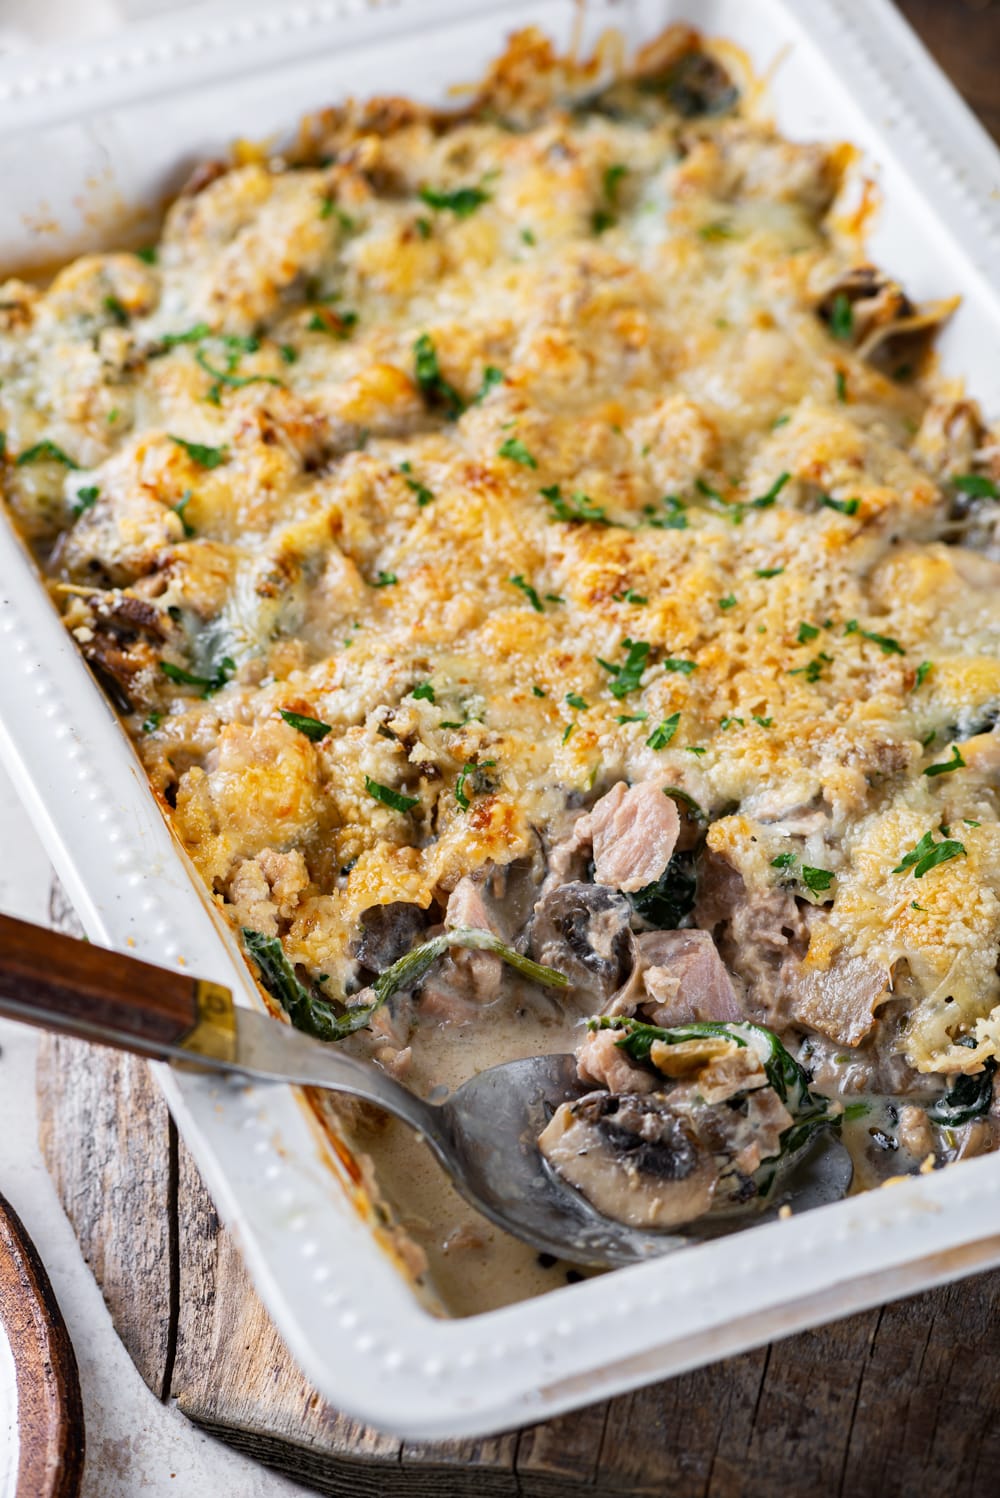 Keto tuna casserole in a white casserole dish. The head of a metal spoon is at the front of the casserole dish and is filled with mushrooms. The casserole dish is on a wooden board.